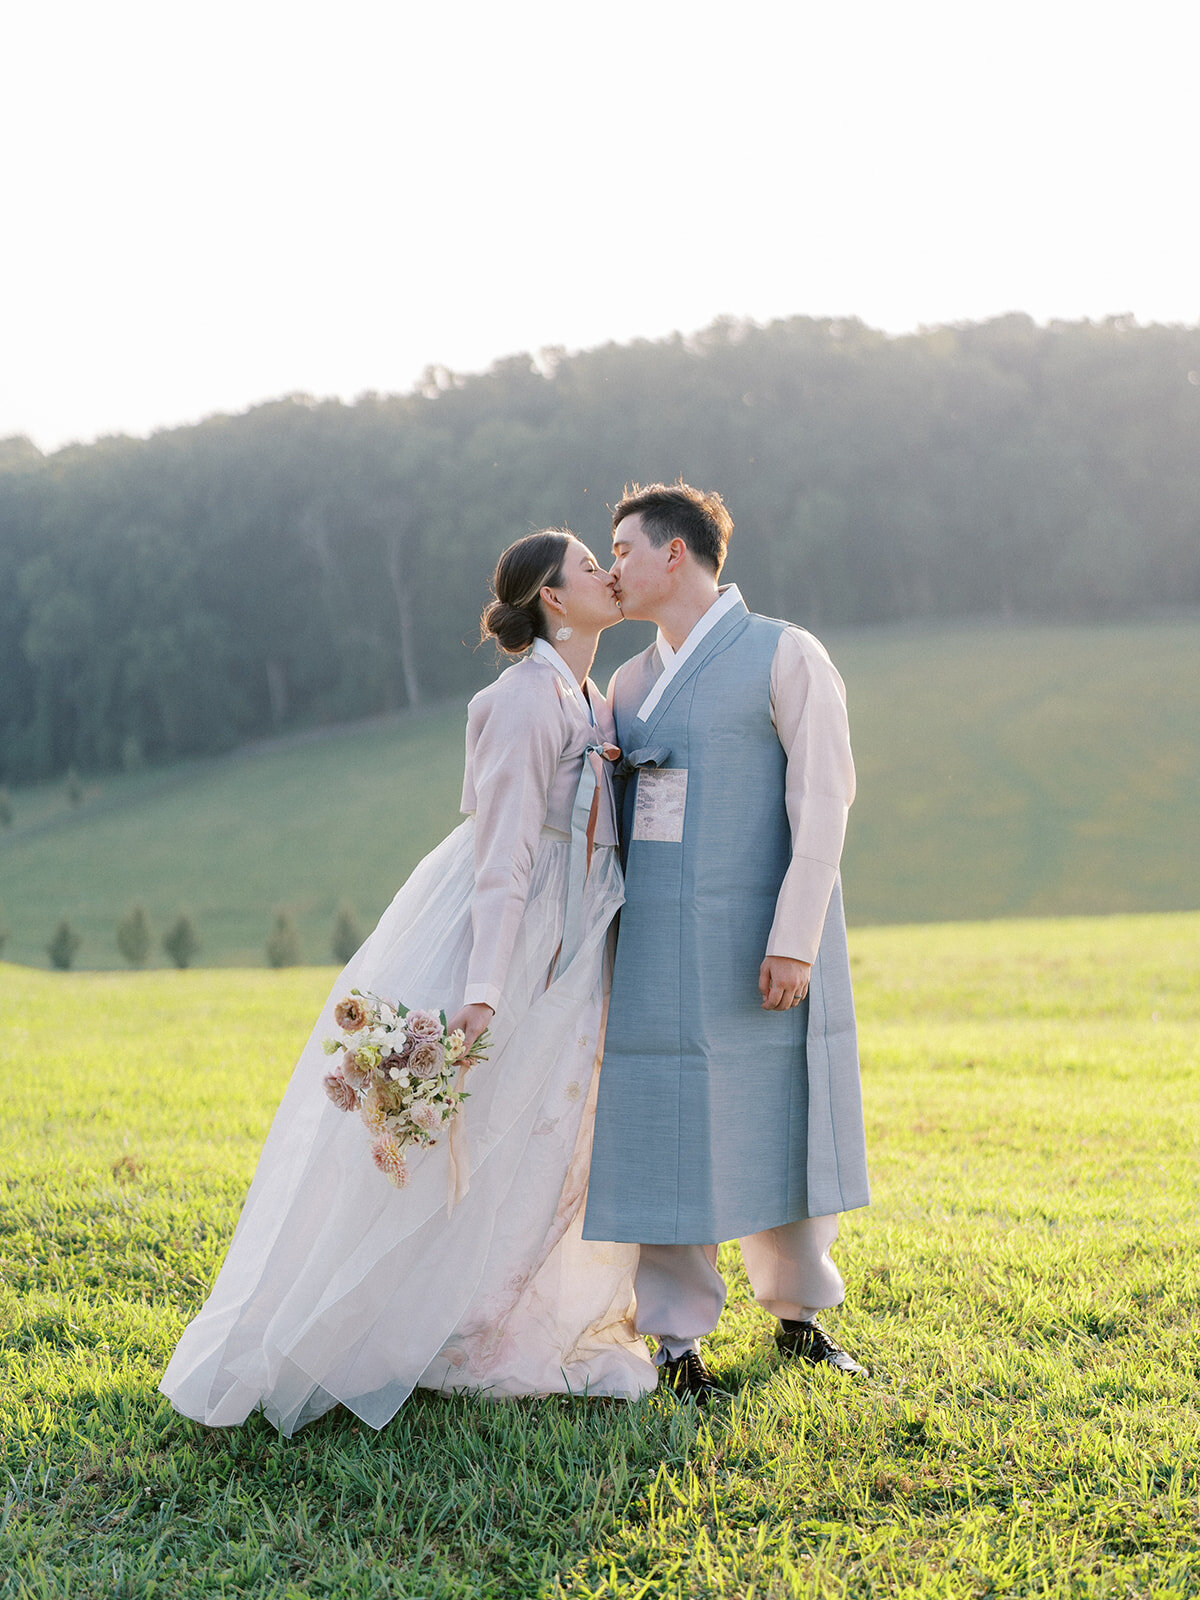 Portrait of the bride and groom in traditional Korean hanboks infront of Harford Hills landscape wedding venue in Fallston Maryland rolling hills